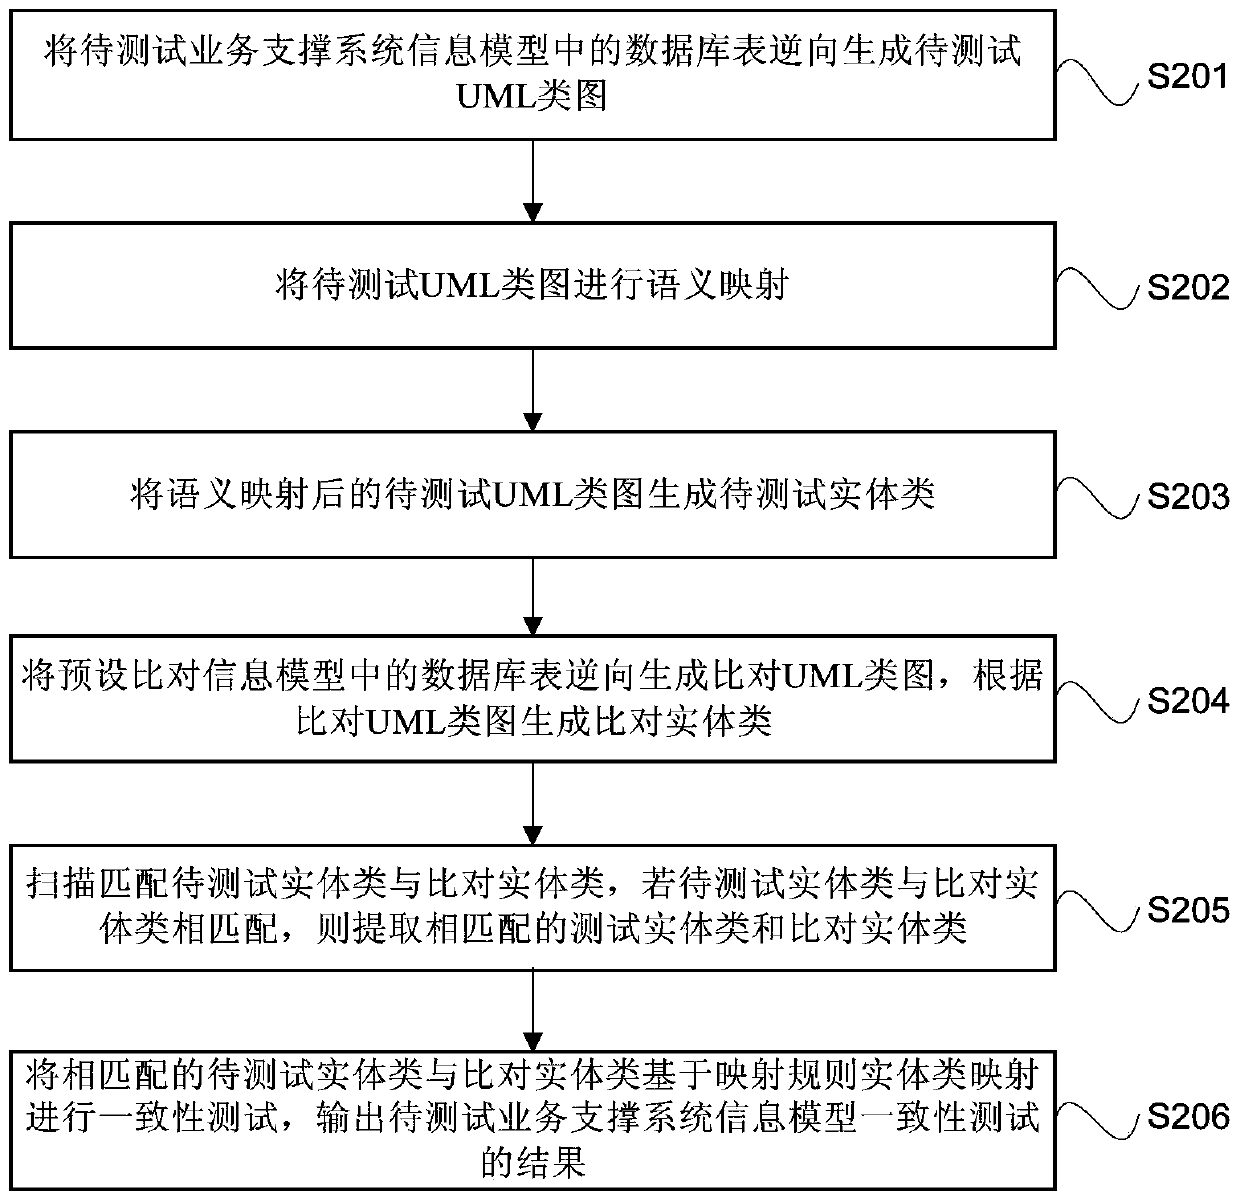 Automated testing method and system for information model consistency of business support system